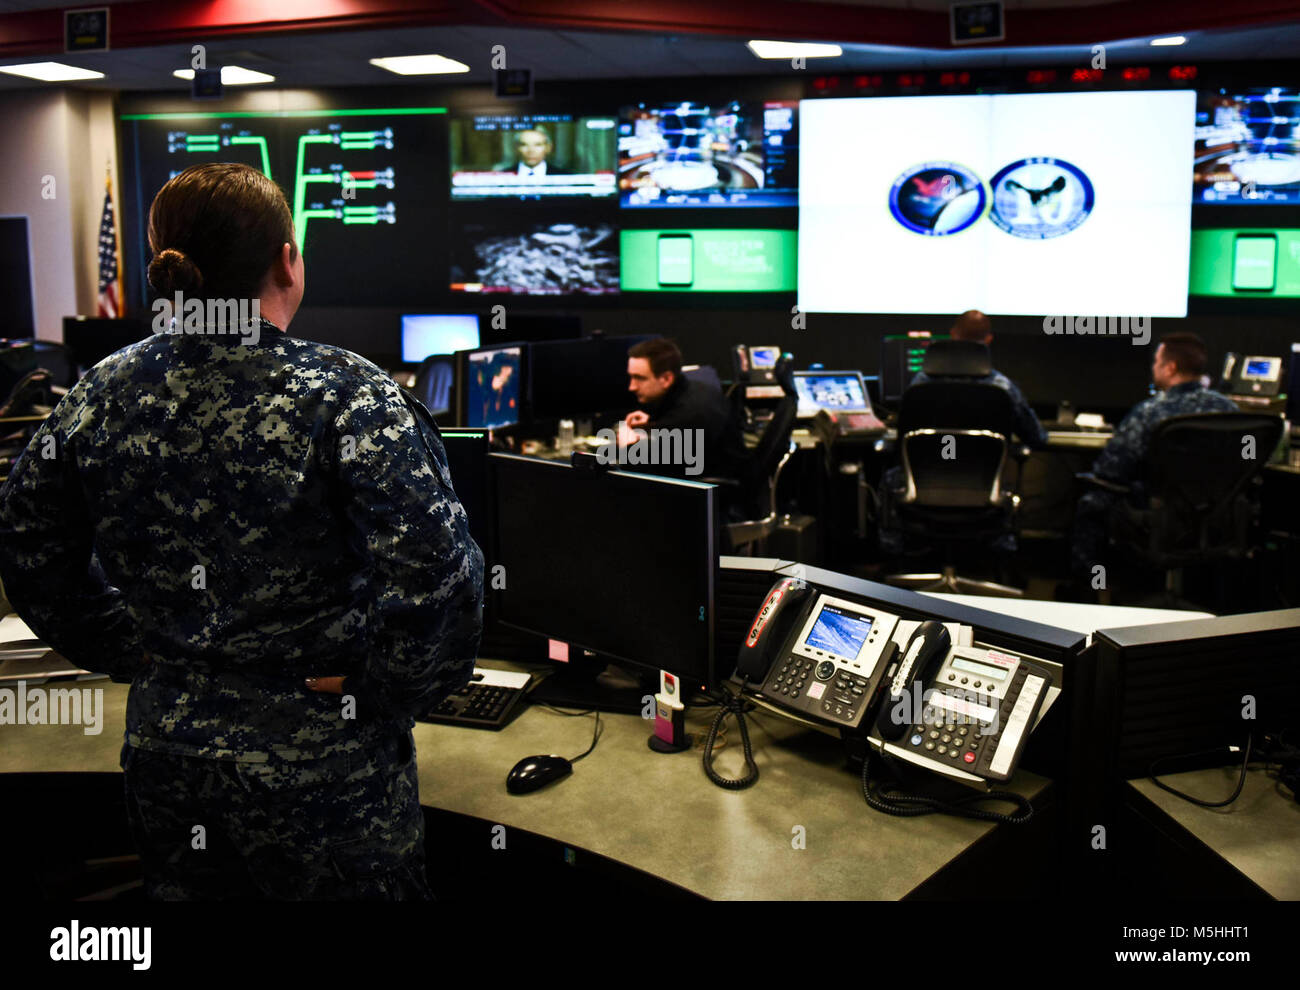 FORT GEORGE G. MEADE, Md. (Dec. 14, 2017) Sailors stand watch in the Fleet Operations Center at the headquarters of U.S. Fleet Cyber Command/U.S. 10th Fleet. U.S. Fleet Cyber Command serves as the Navy component command to U.S. Strategic Command and U.S. Cyber Command. U.S. 10th Fleet is the operational arm of Fleet Cyber Command and executes its mission through a task force structure. (U.S. Navy Stock Photo